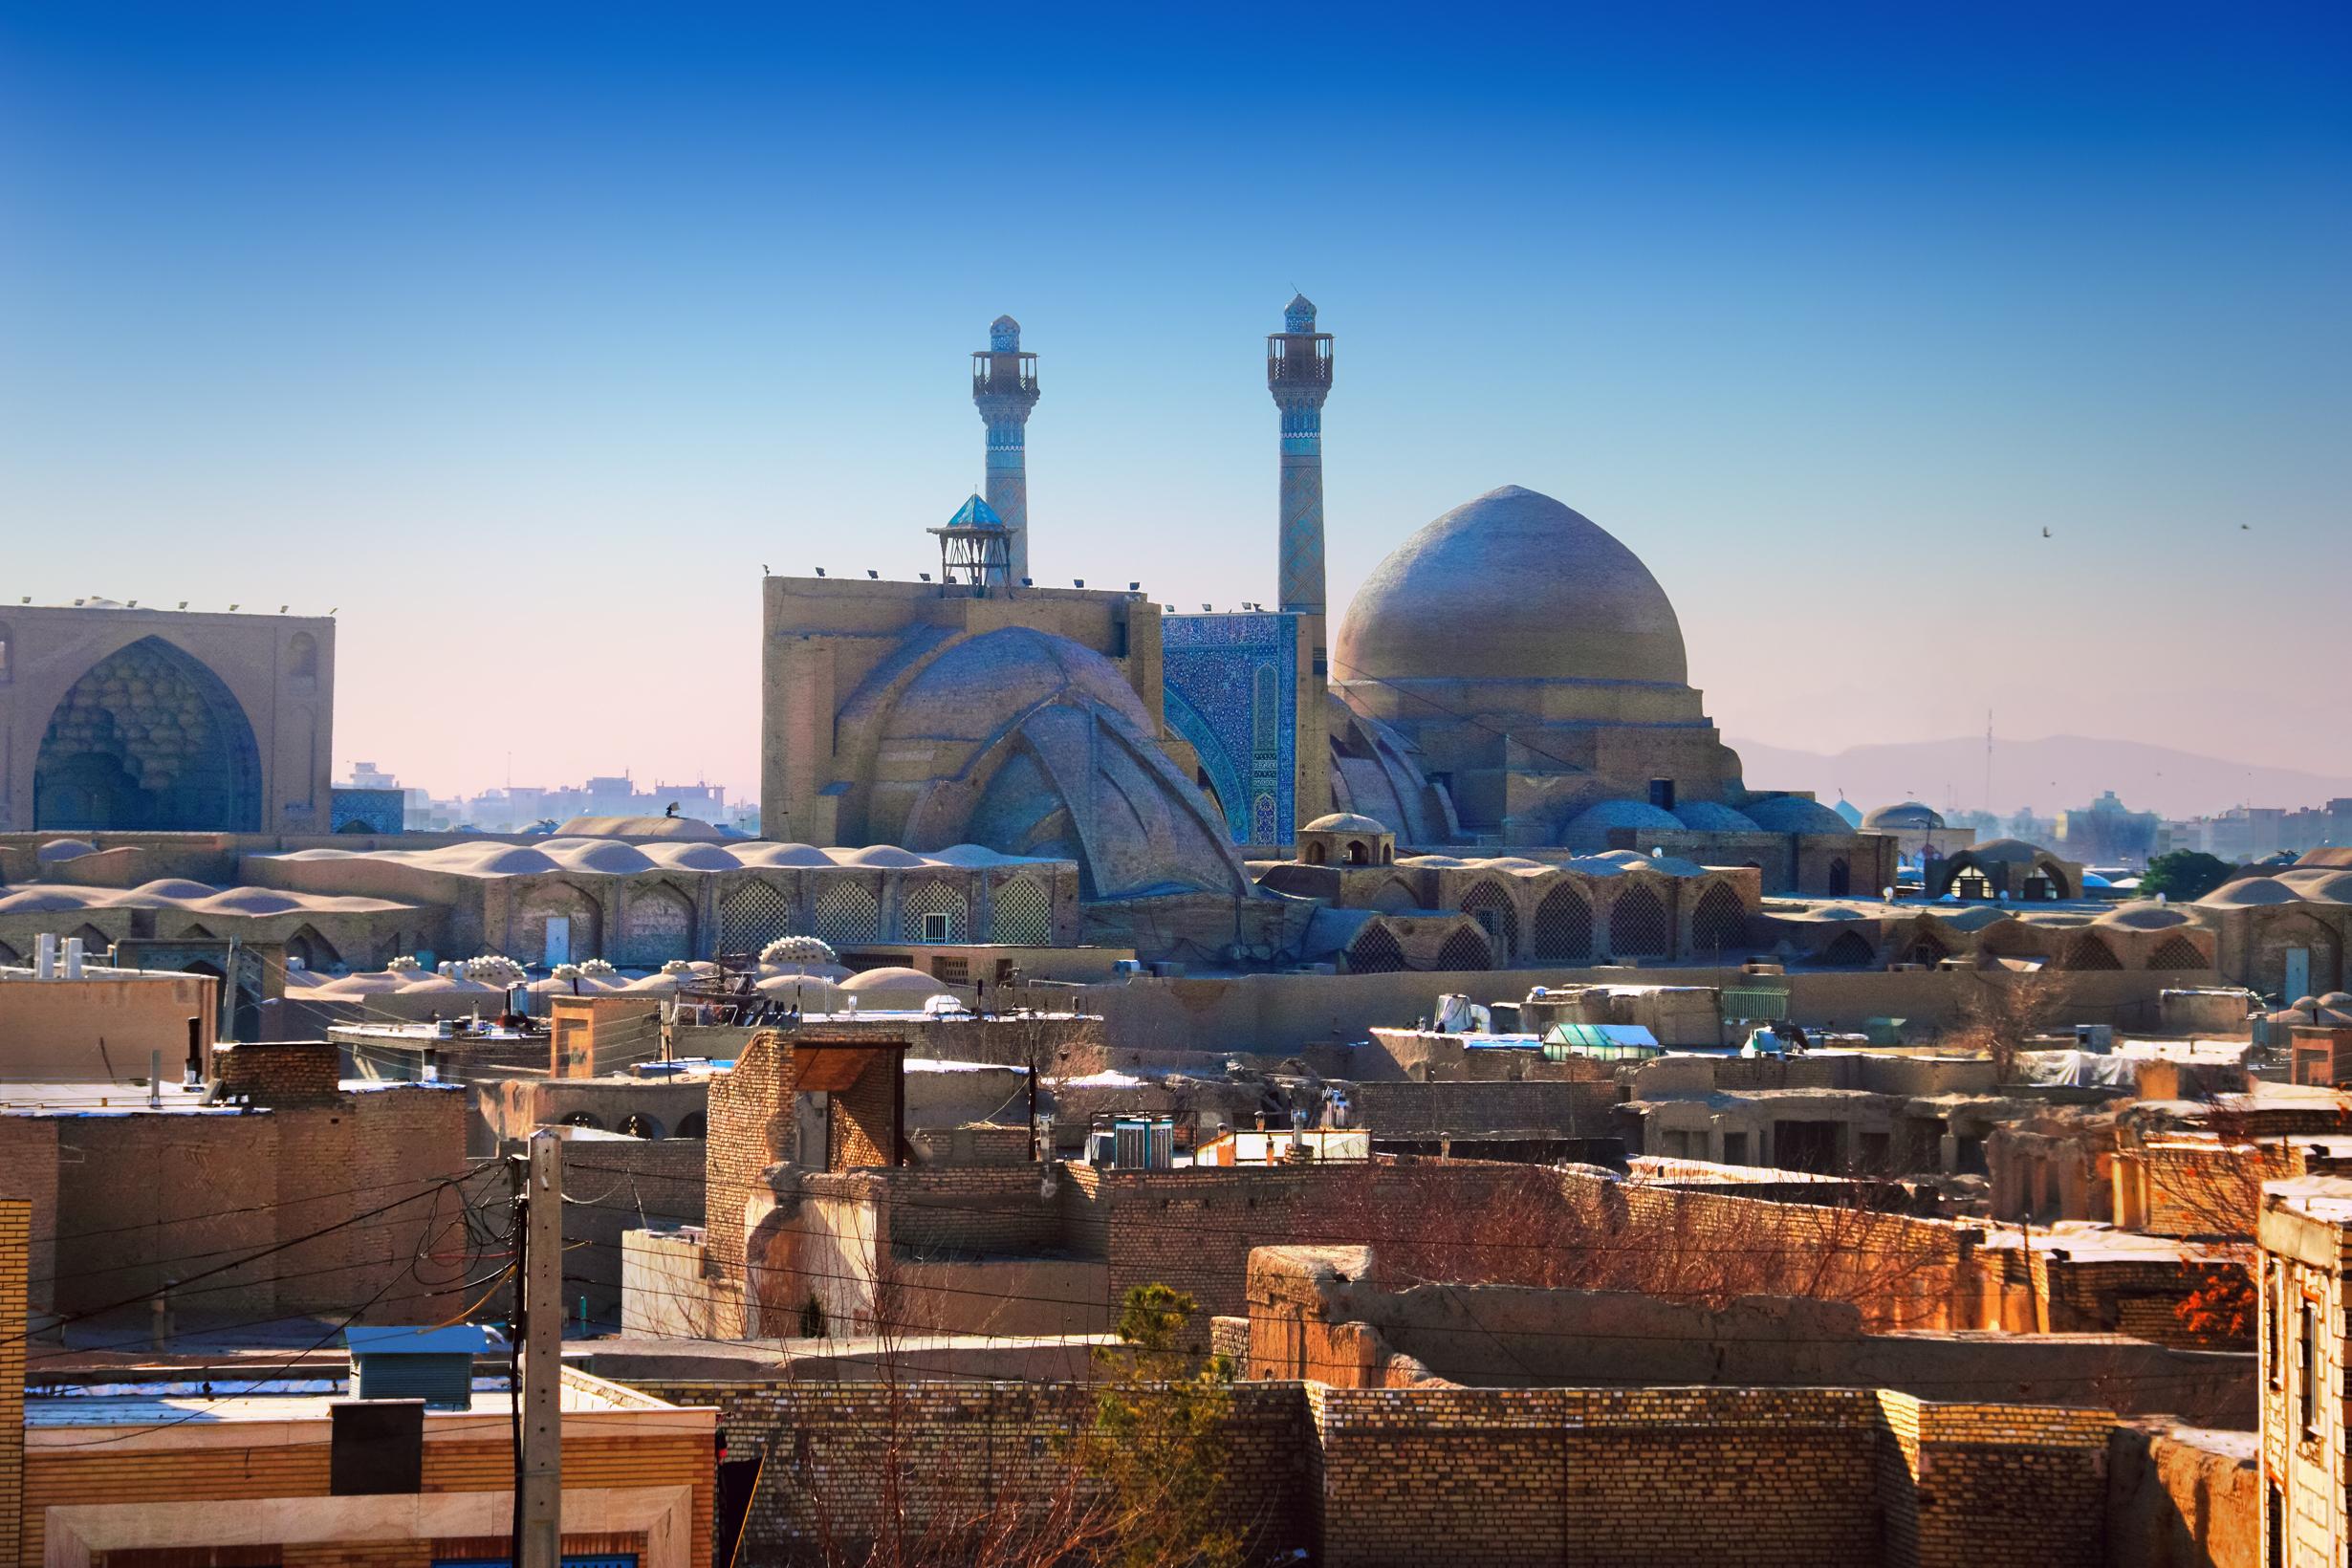 The dome can be seen from rooftops all around Isfahan © Natalia Davidovich / Shutterstock